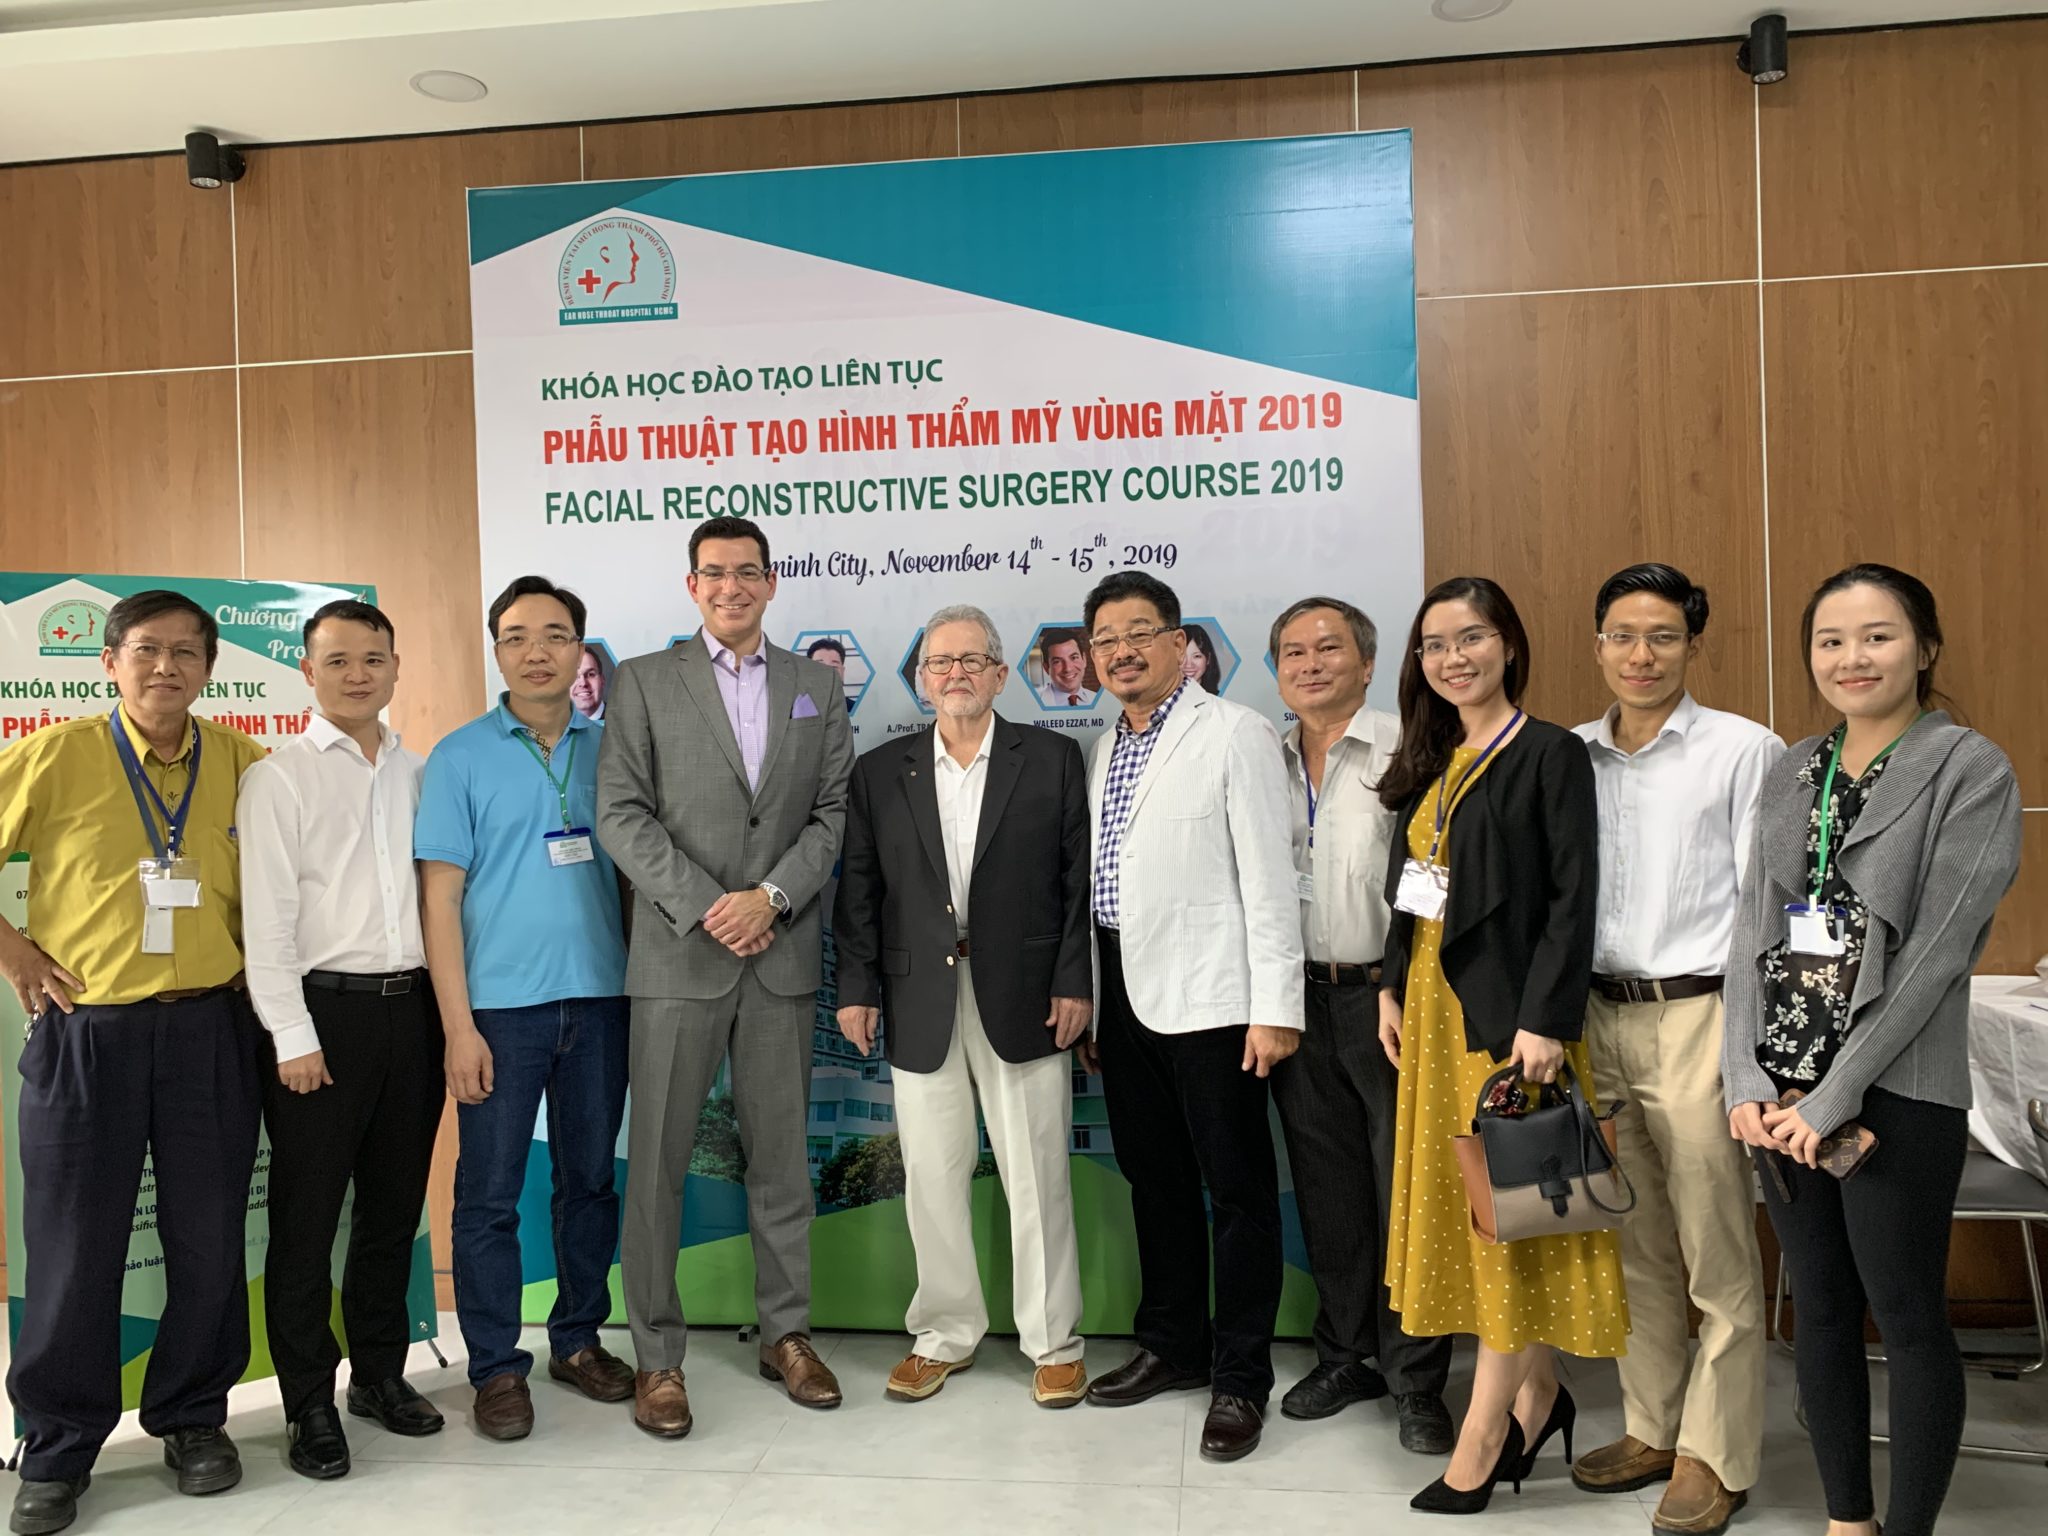 Dr. Ezzat Visits Vietnam to Provide Surgical Training and Medical Care